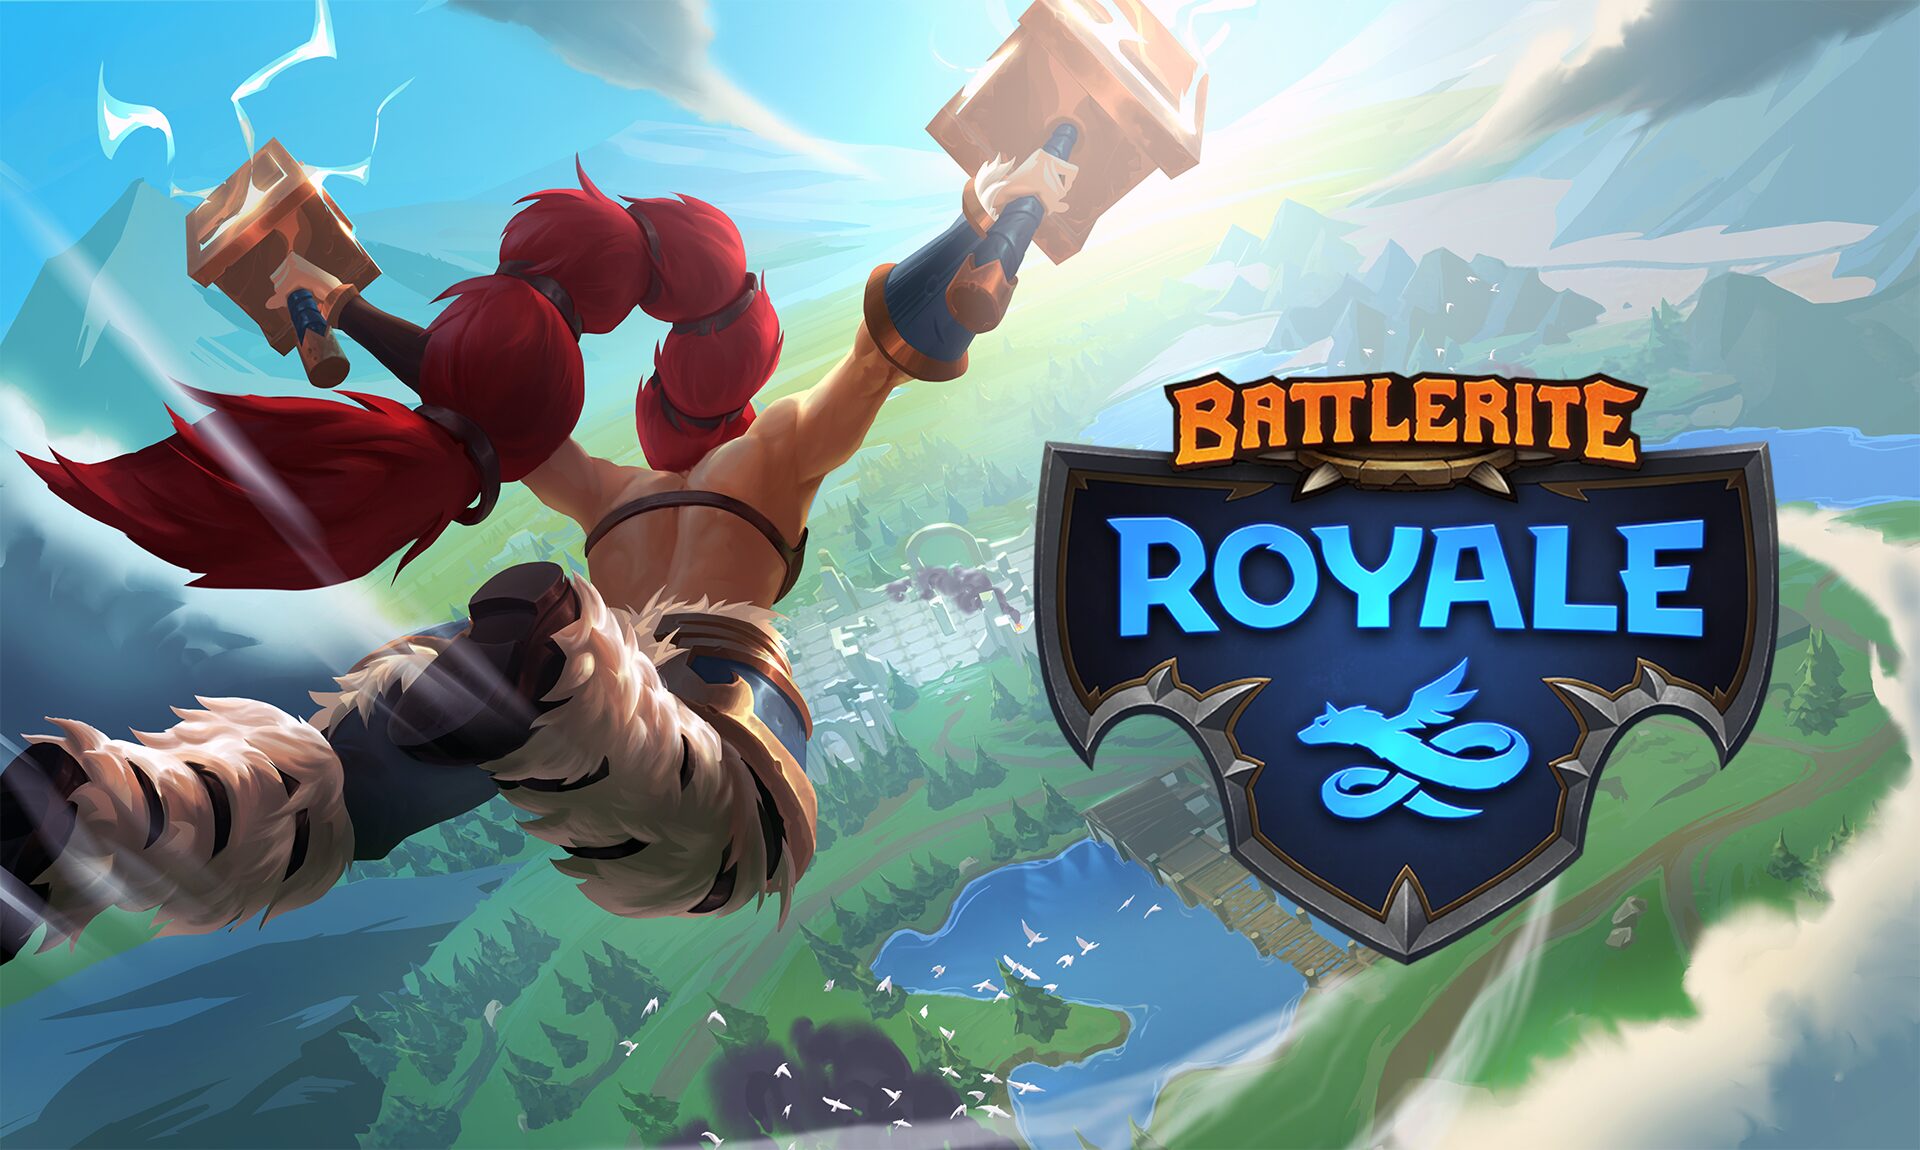 Play Battlerite Royale for free this week